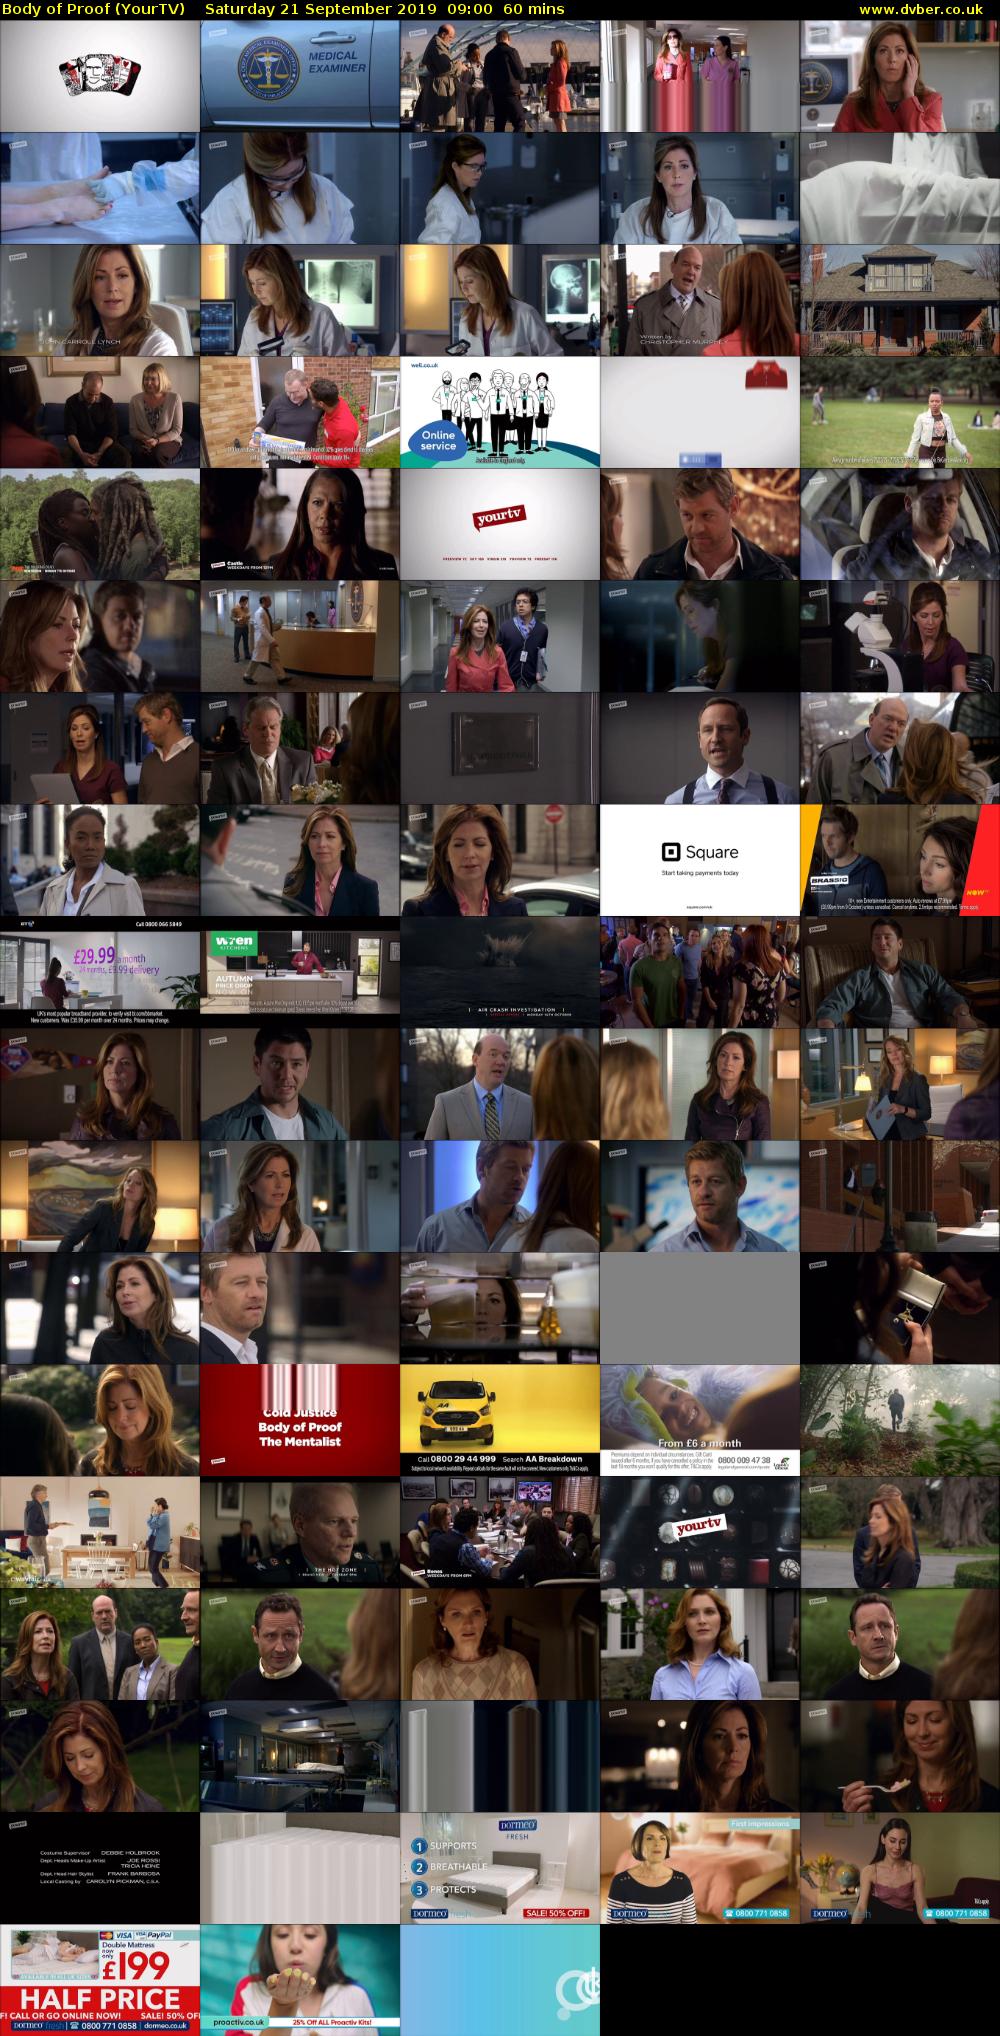 Body of Proof (YourTV) Saturday 21 September 2019 09:00 - 10:00